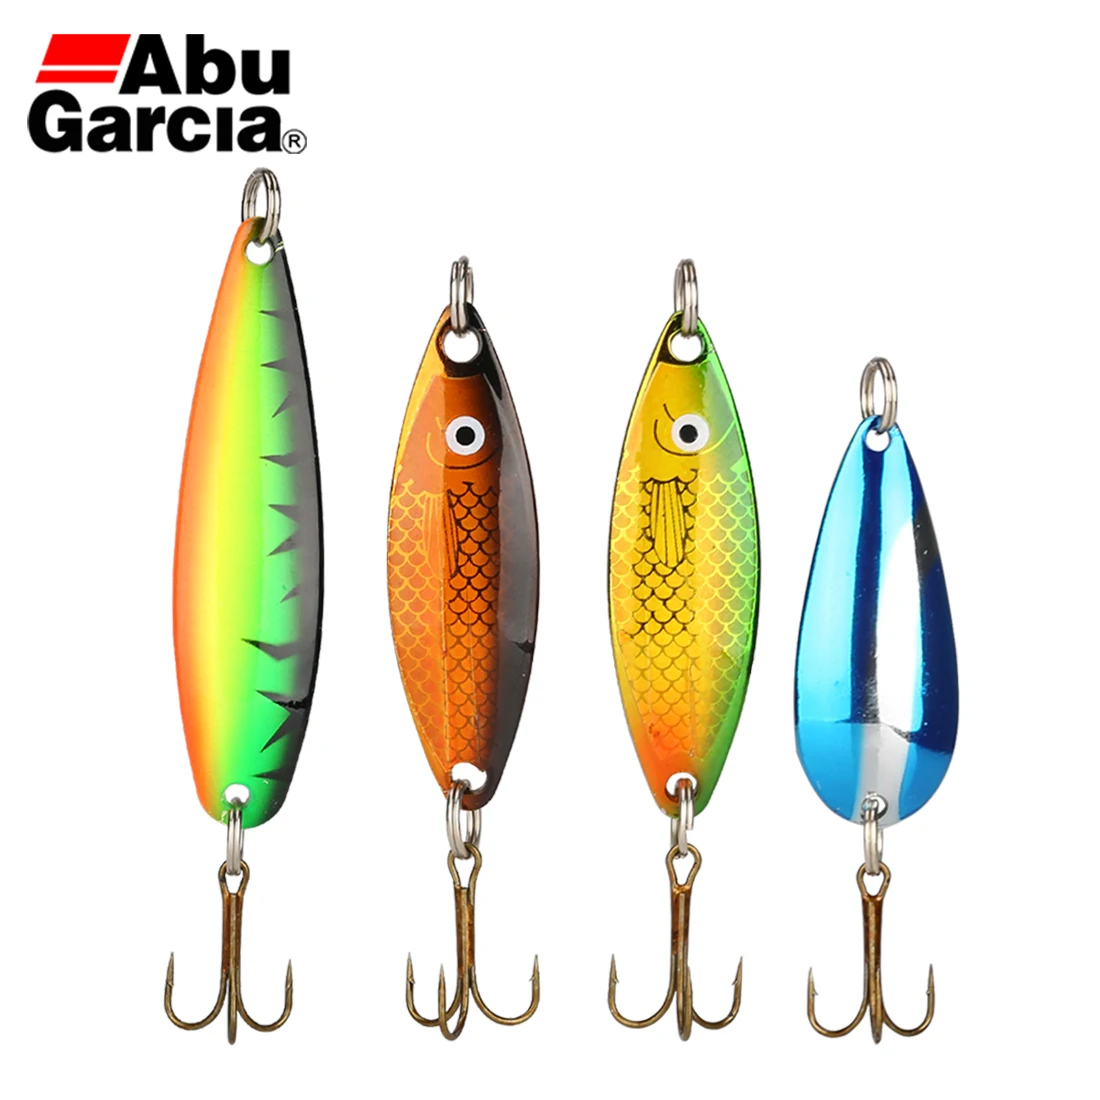 ABU GARCIA PERCH PIKE FISHING LURE KIT TROUT SPINNER SET PACK OF 4 SPOONS 